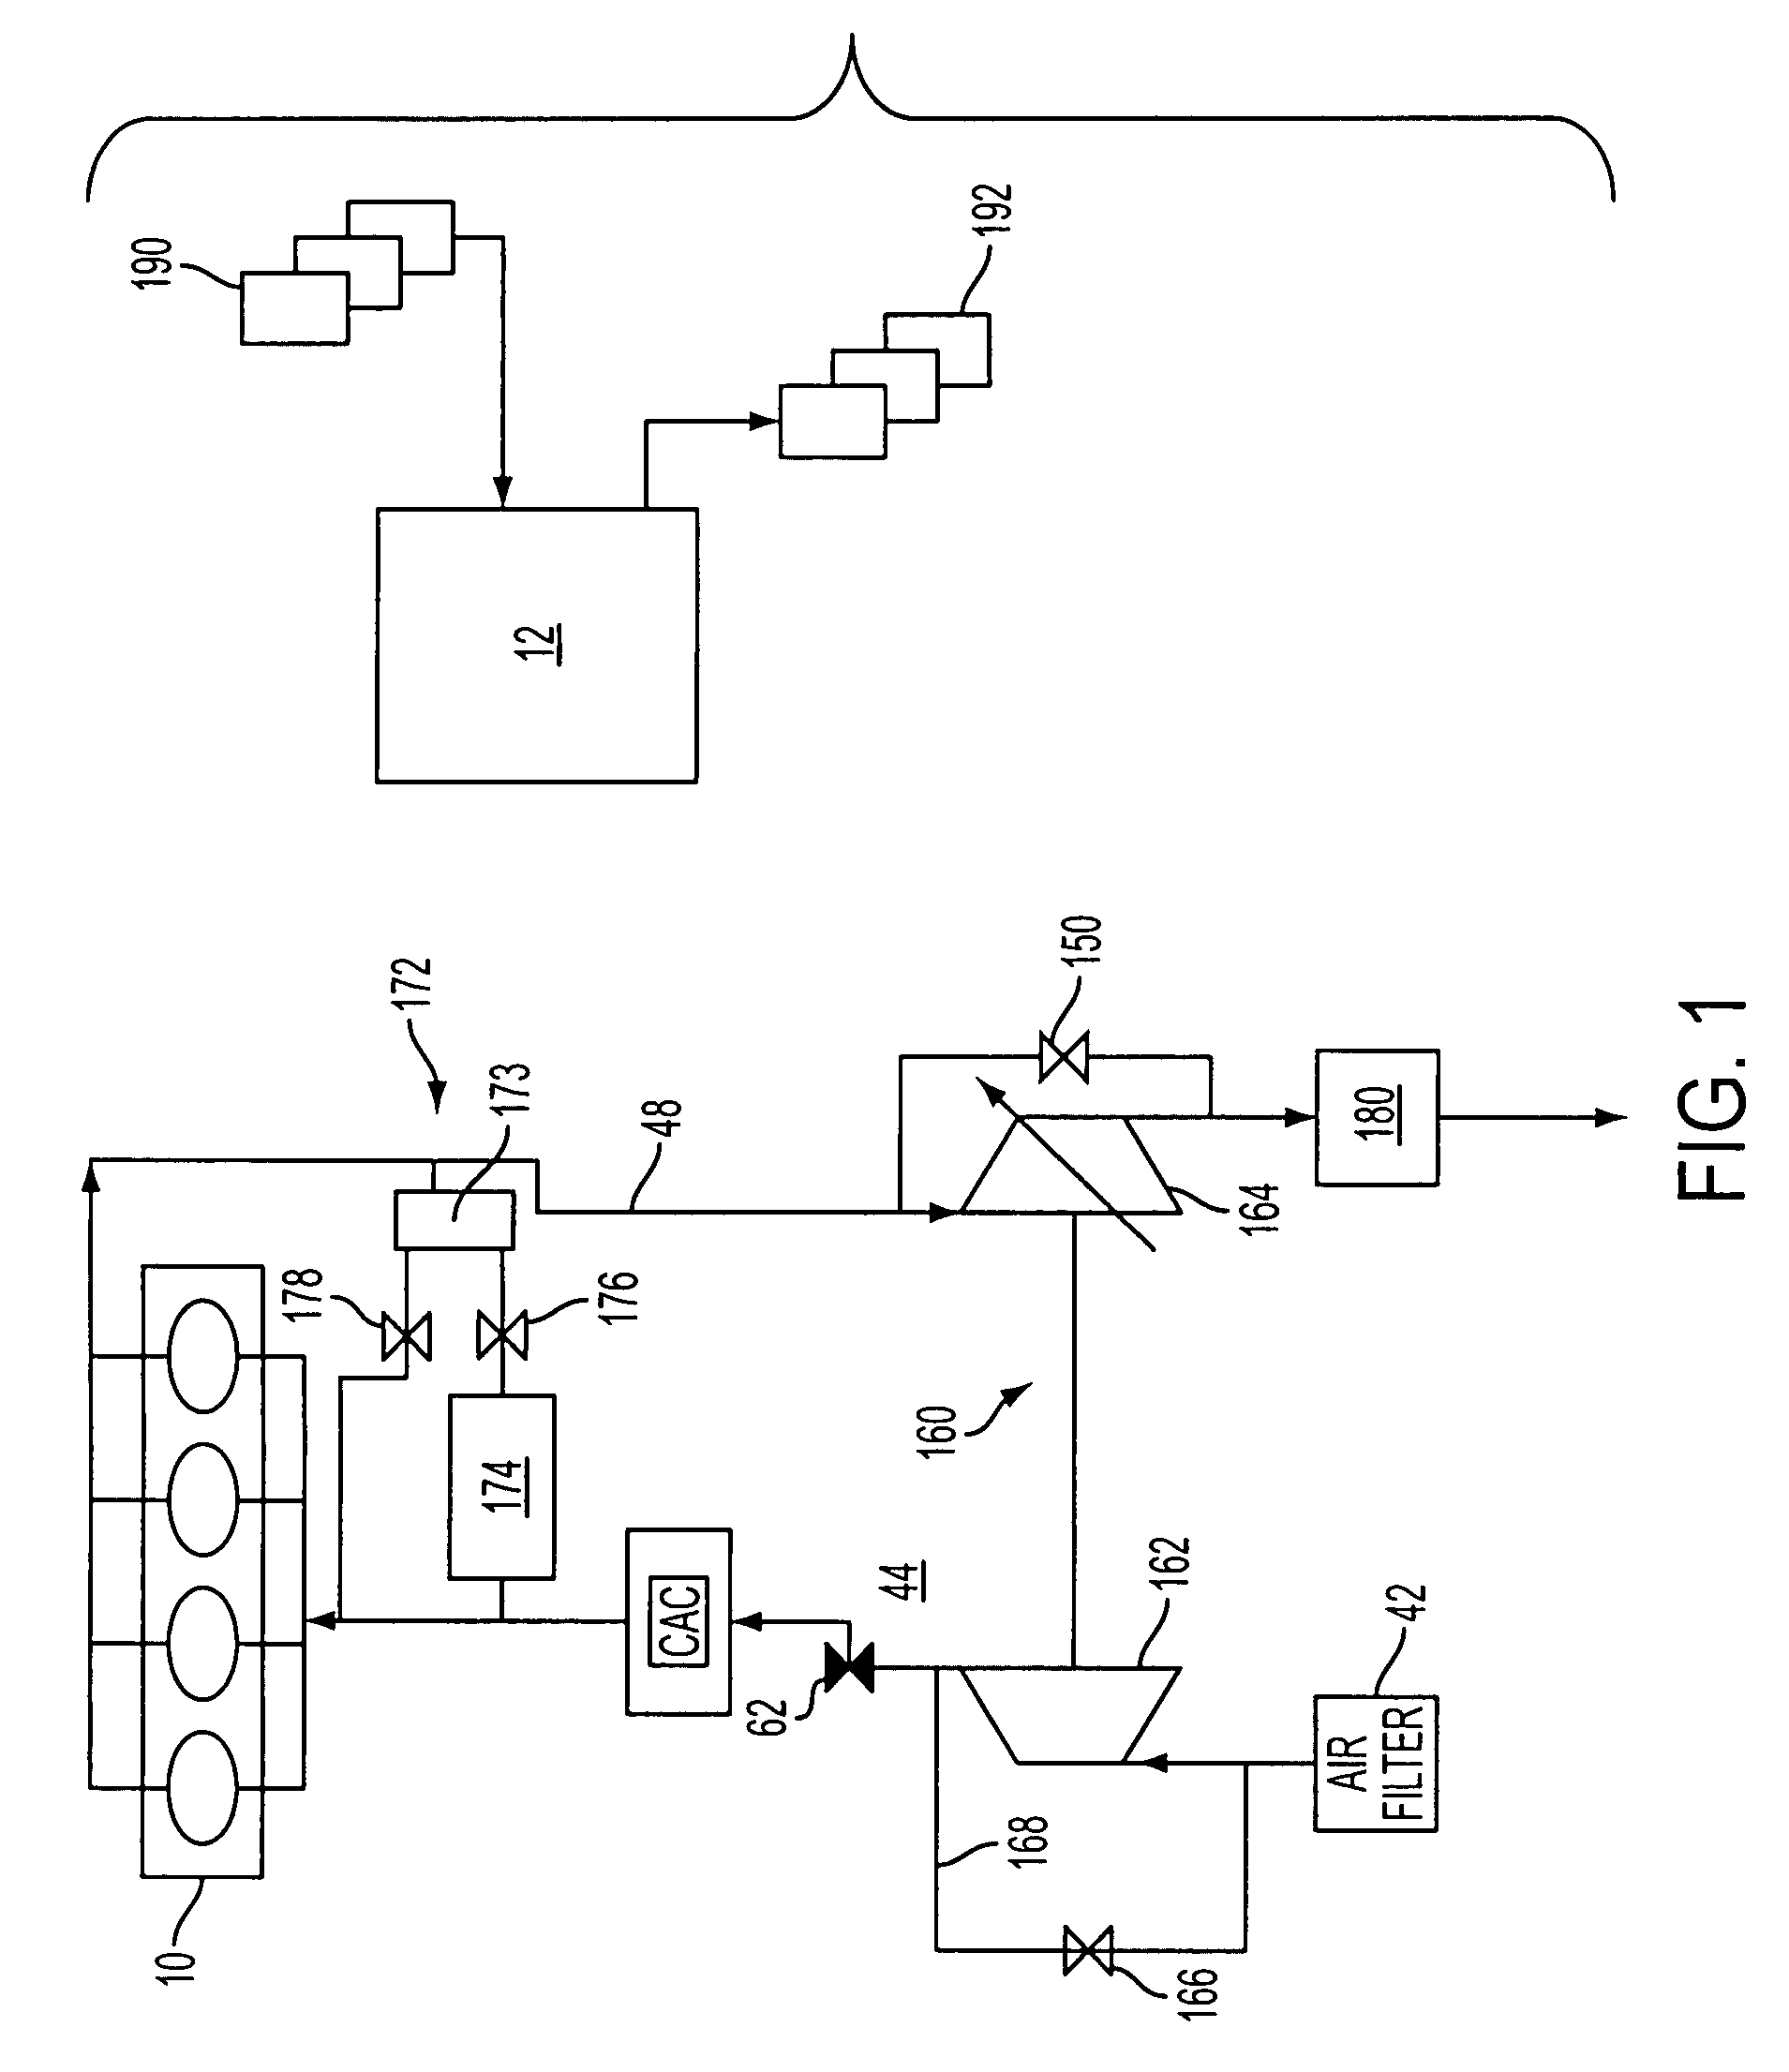 Turbocharged engine control operation with adjustable compressor bypass